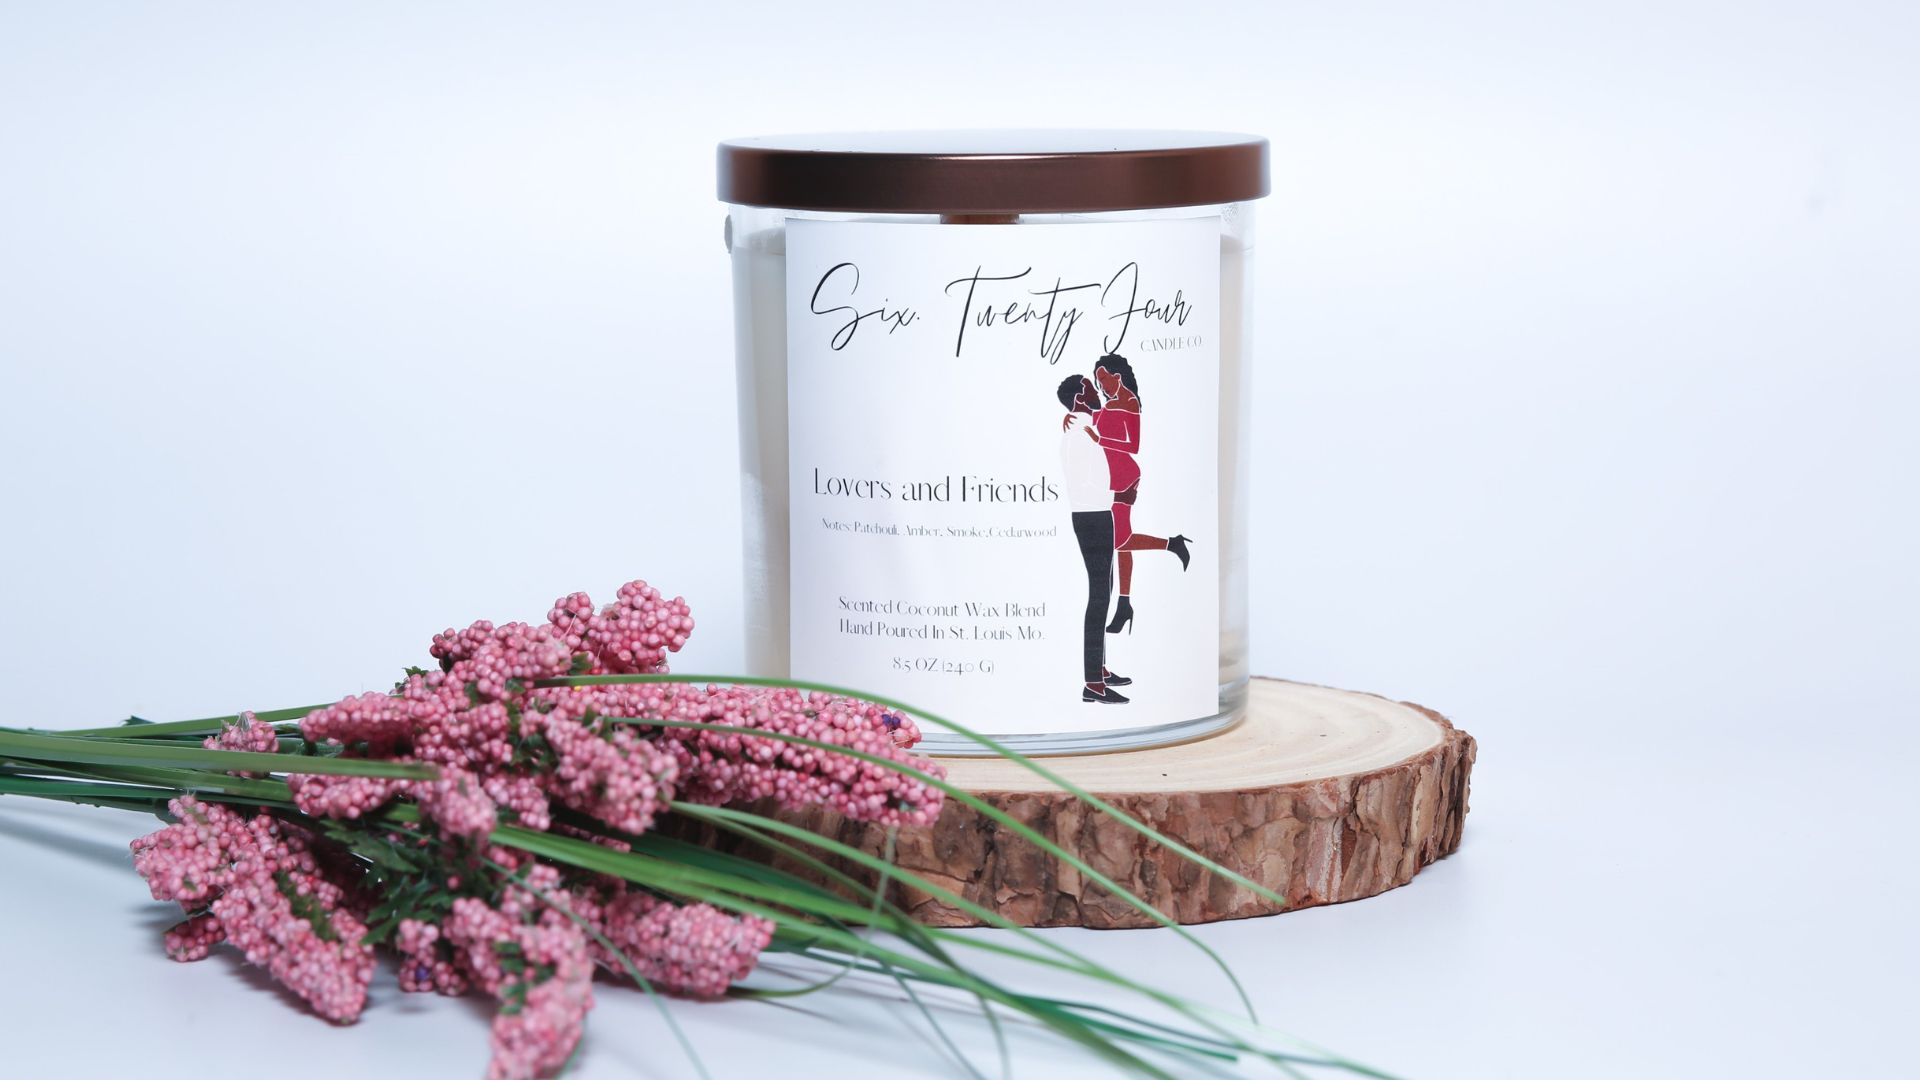 Lovers and Friends is one of the candles from Six.Twenty Four Candle Co. in St. Louis.